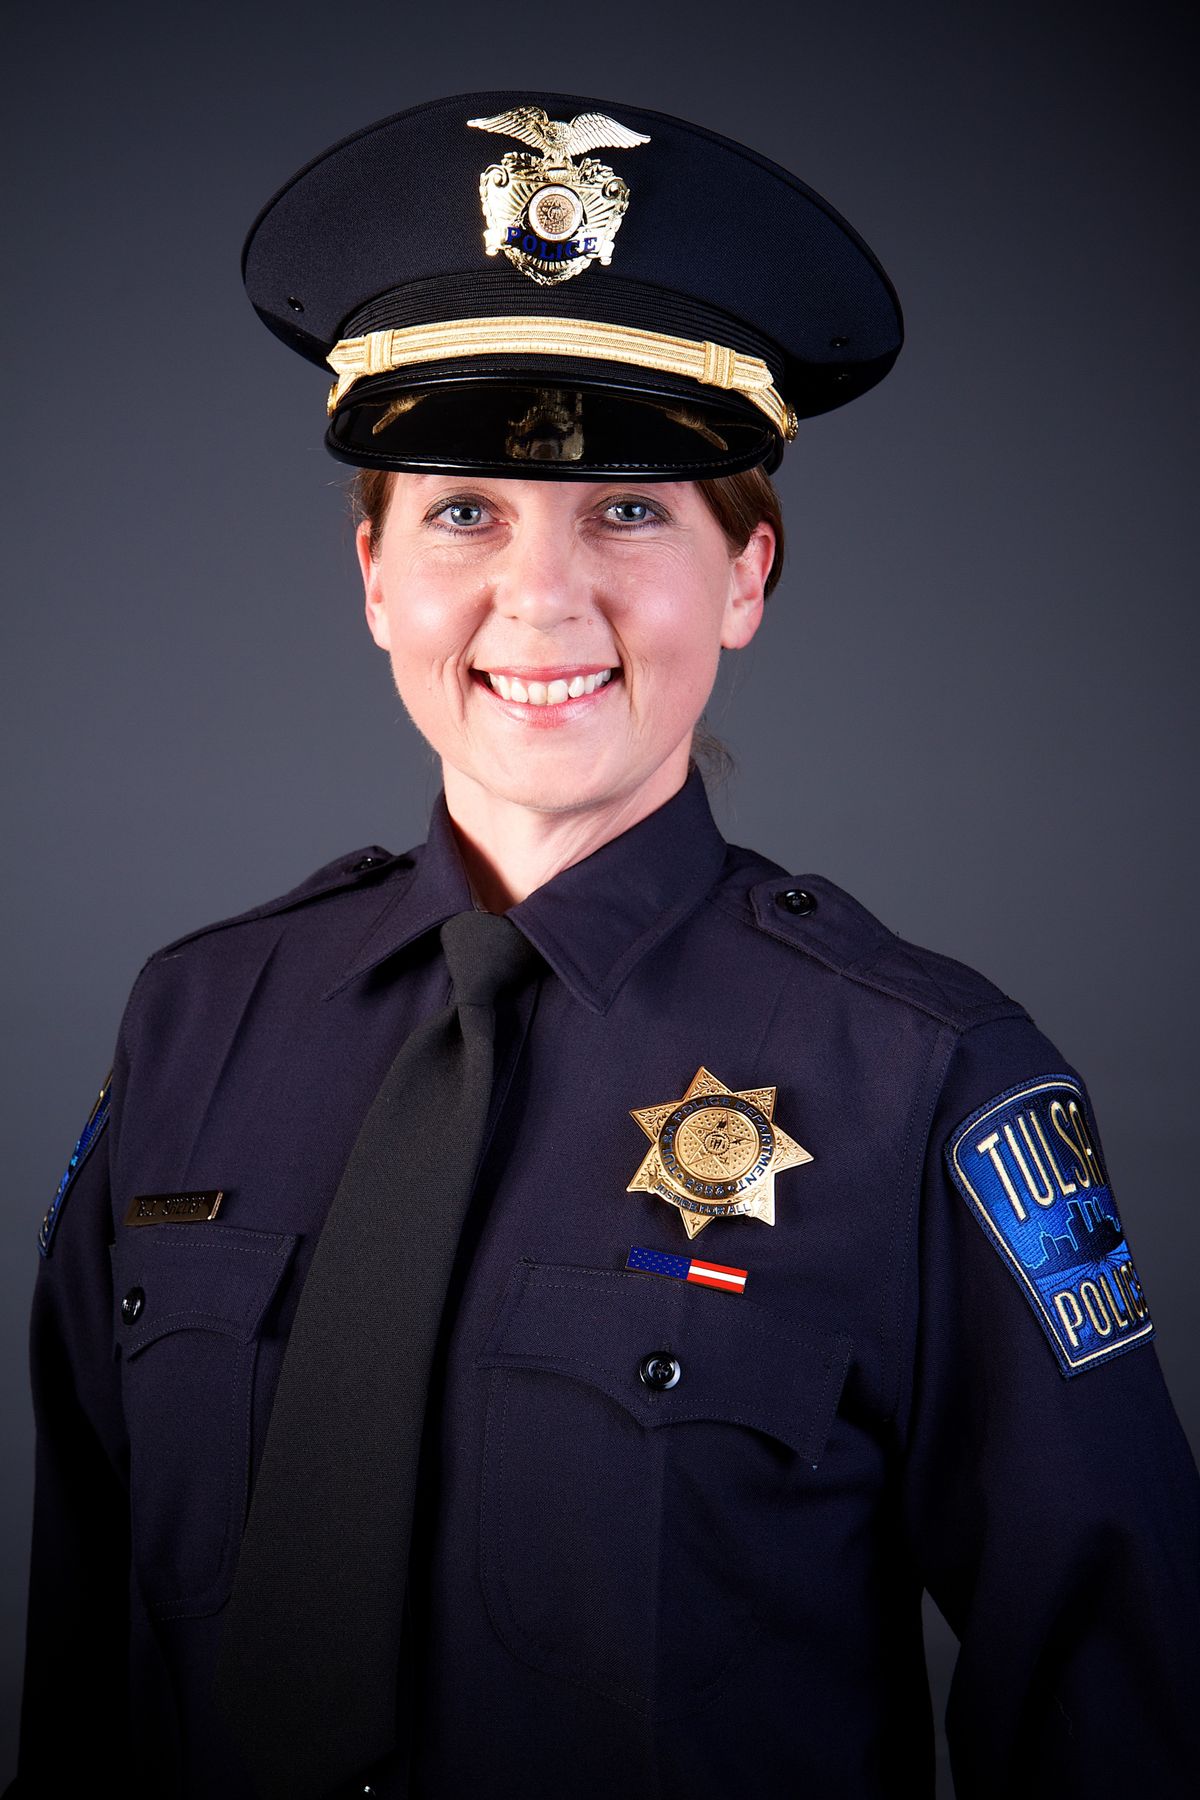 This undated file photo provided by the Tulsa Oklahoma Police Department shows officer Betty Shelby. Police say Tulsa officer Shelby fired the fatal shot that killed 40 year-old Terence Crutcher, Sept. 16, 2016. Prosecutors in Tulsa, Oklahoma, charged Shelby,  a white police officer who fatally shot an unarmed black man on a city street with first-degree manslaughter Thursday, Sept. 22, 2016. (Tulsa Police Department via AP, File) (AP)